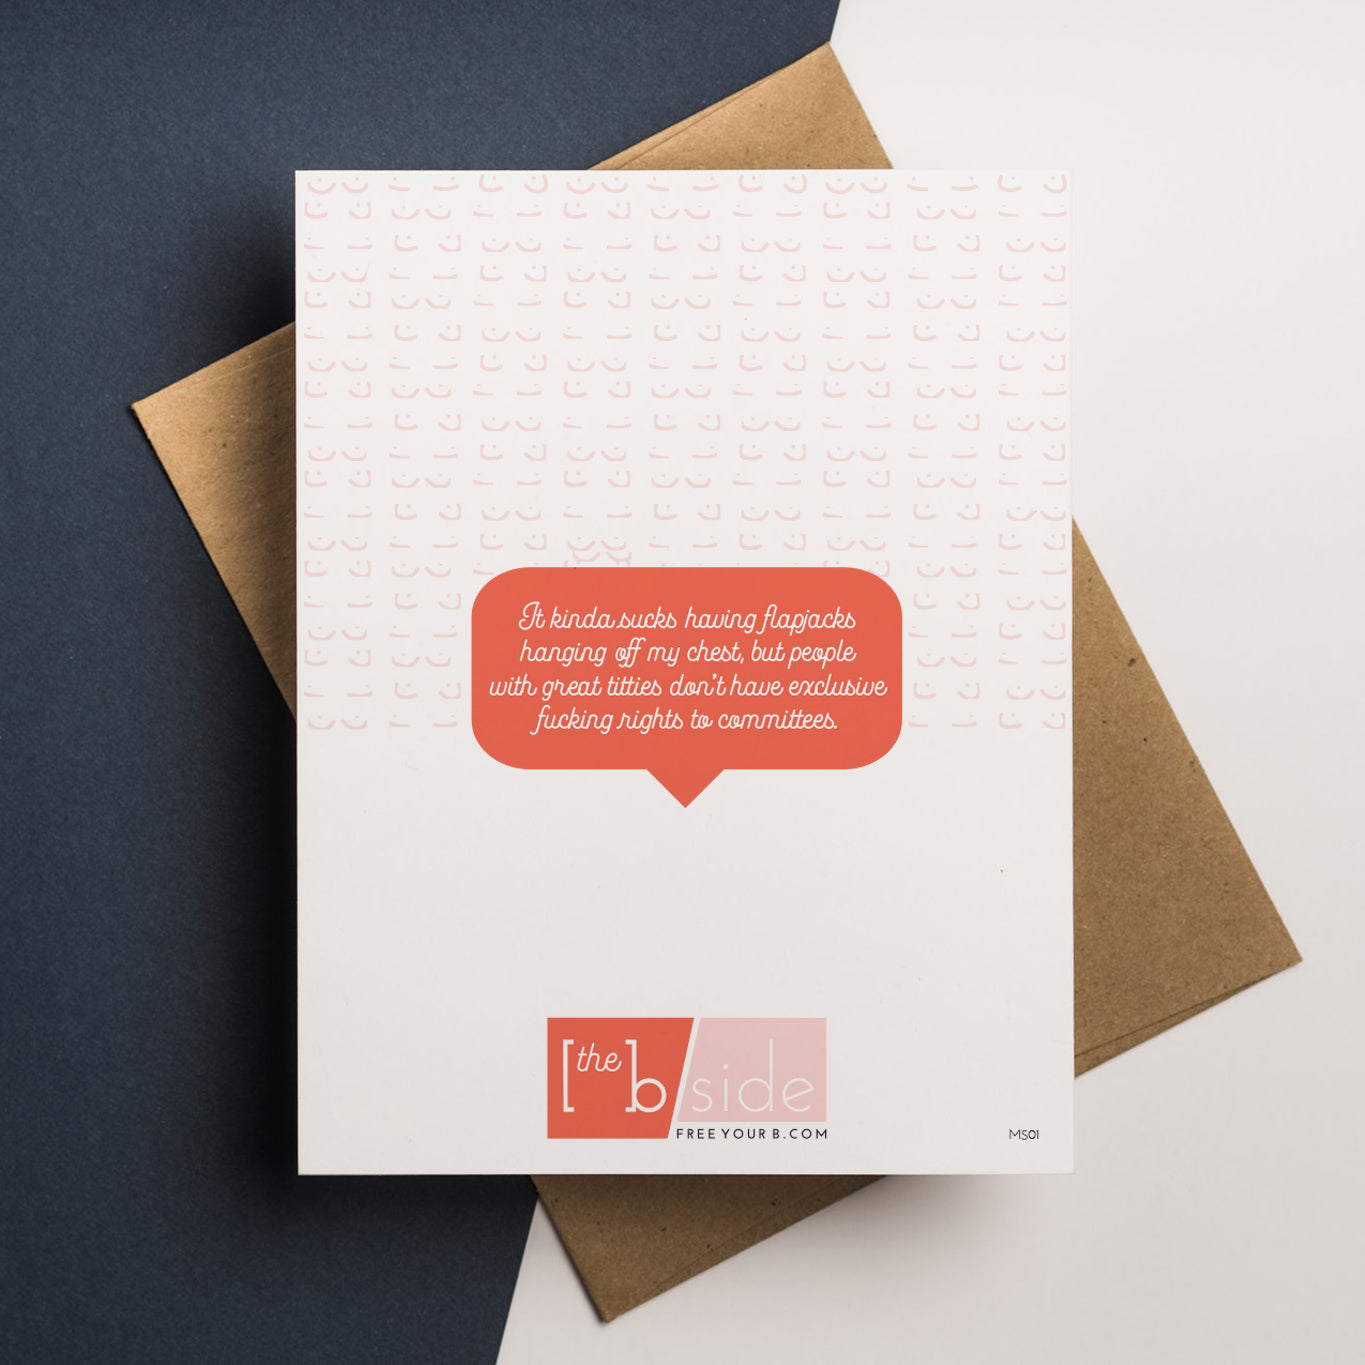 A funny and empowering friendship greeting card for friends with itty titties that reads "It kinda sucks having flapjacks hanging off my chest, but people with great titties don't have exclusive fucking rights to committees."